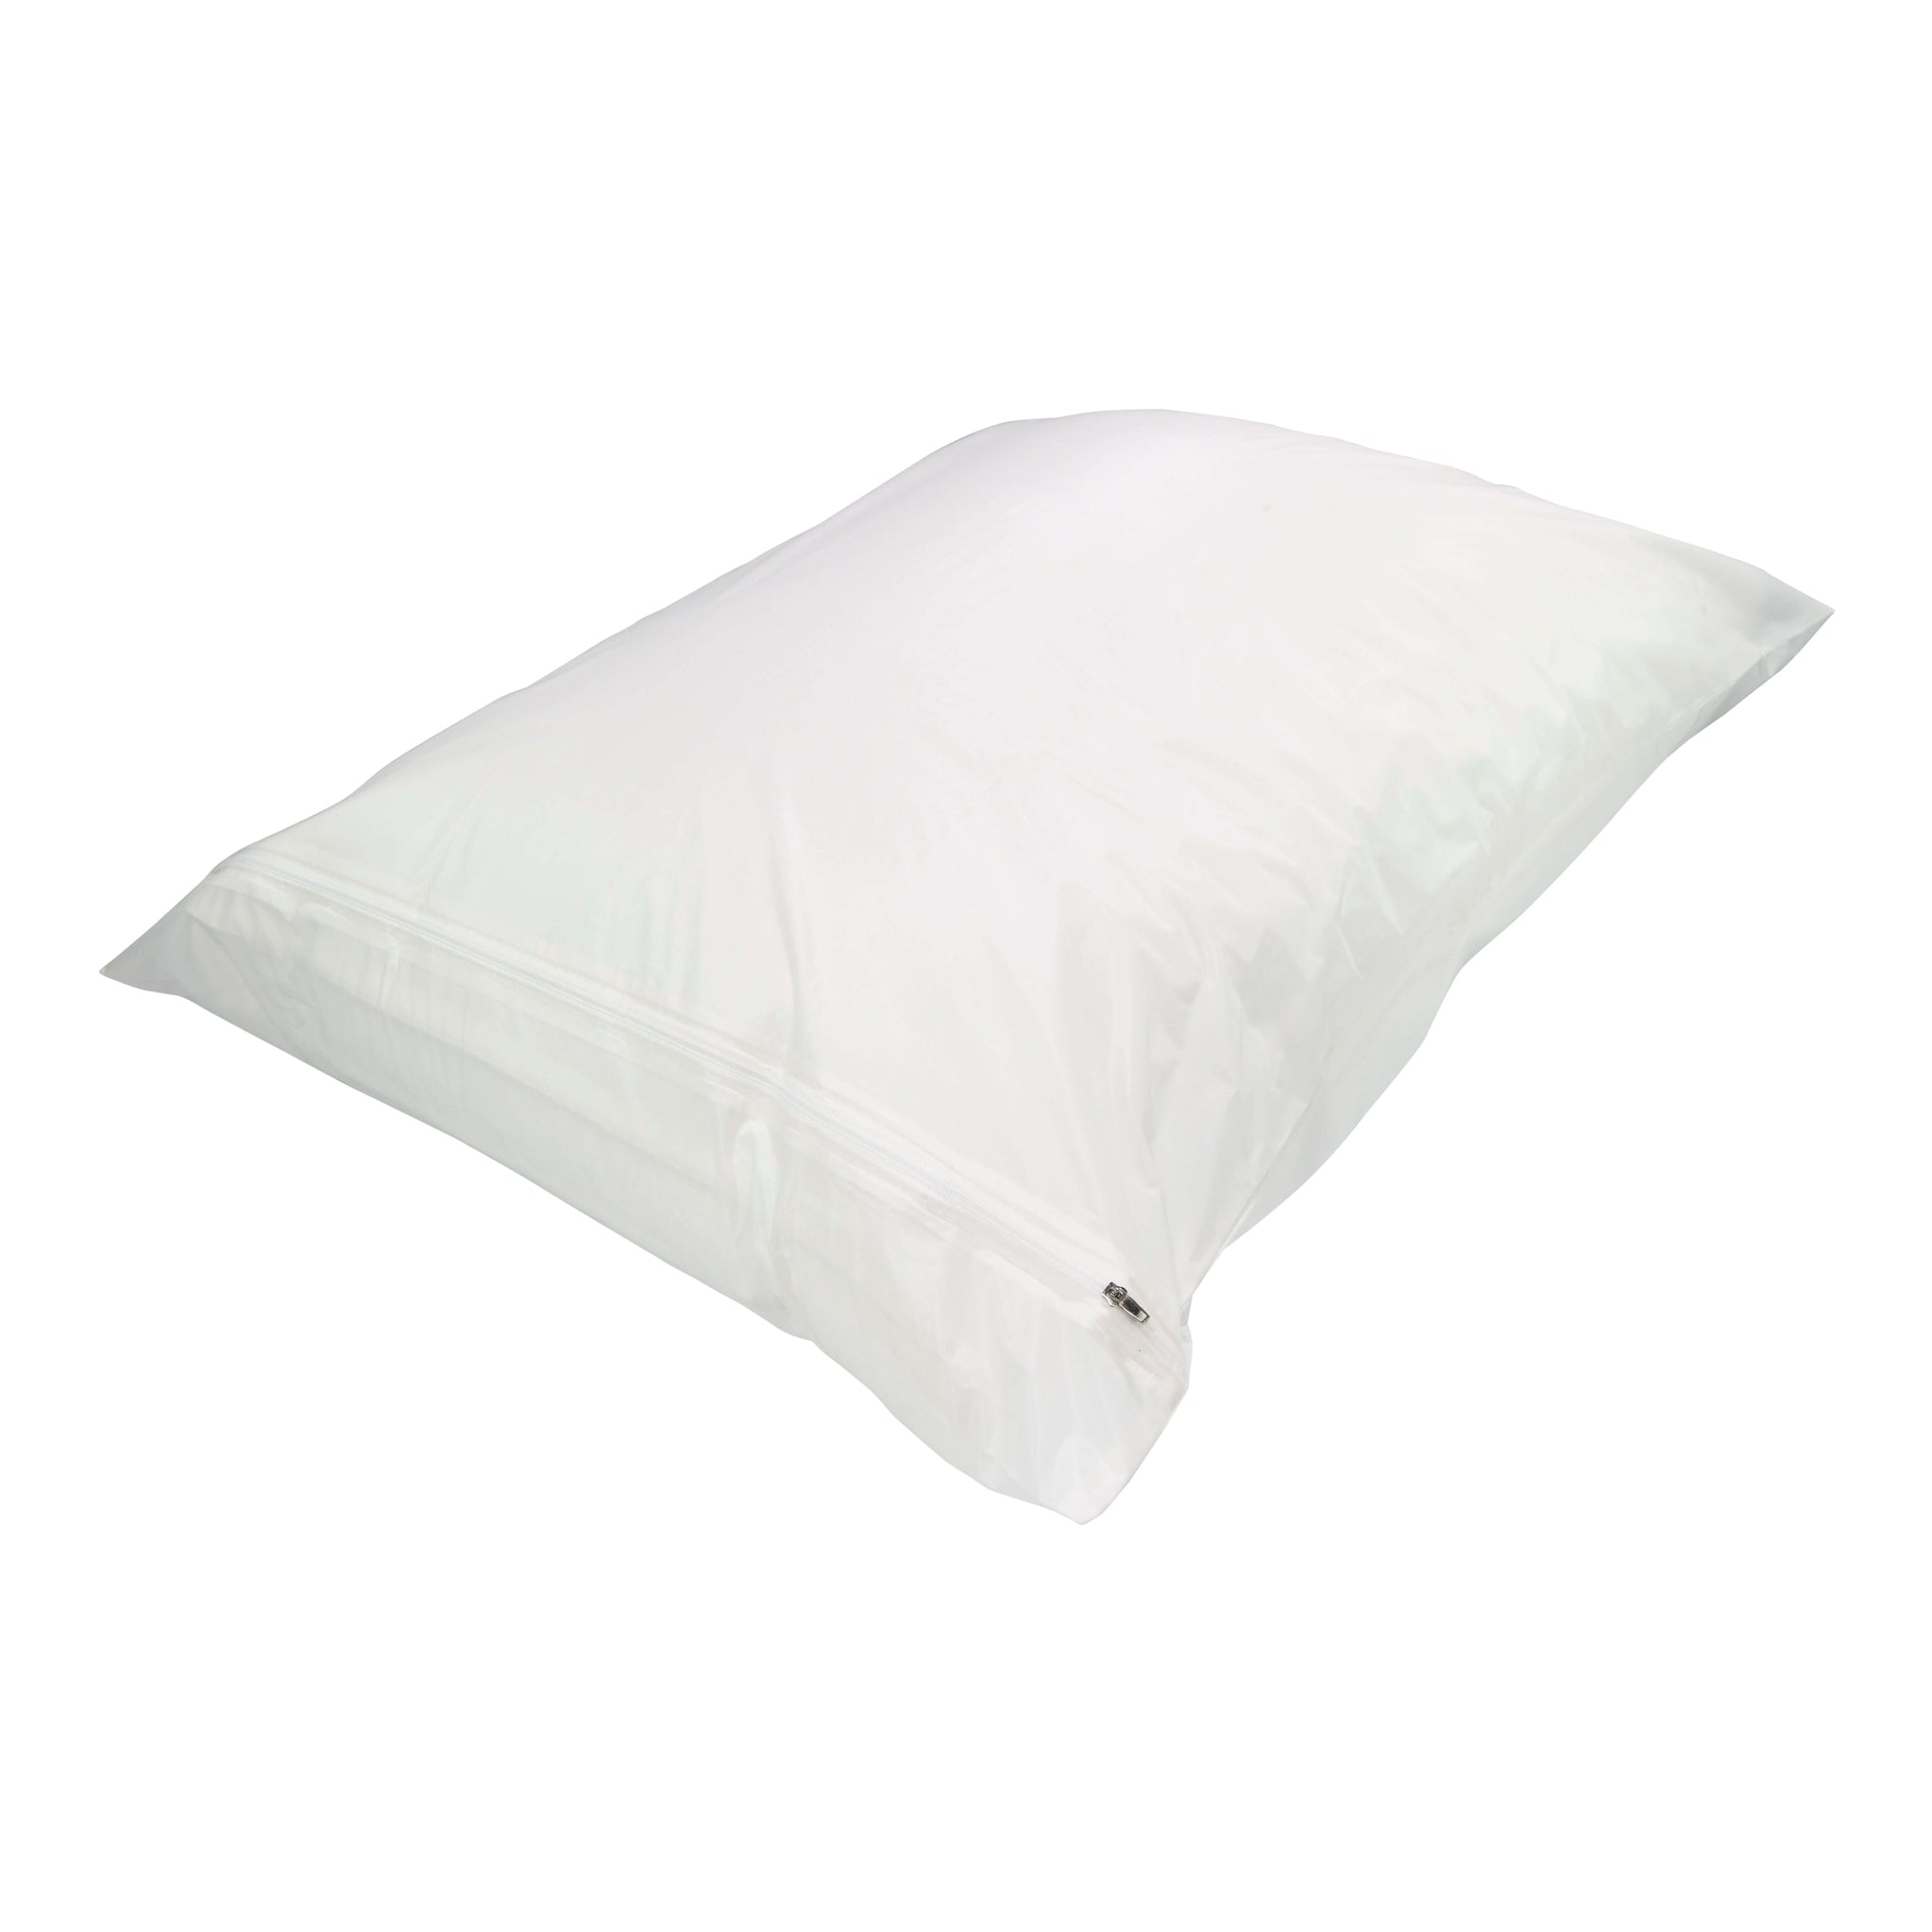 6 Gauge Vinyl Zippered Pillow Protectors - The BedBug Solution™ for Your Pillows - Packed in Pairs Pillow Protector Bargoose Home Textiles, Inc. 